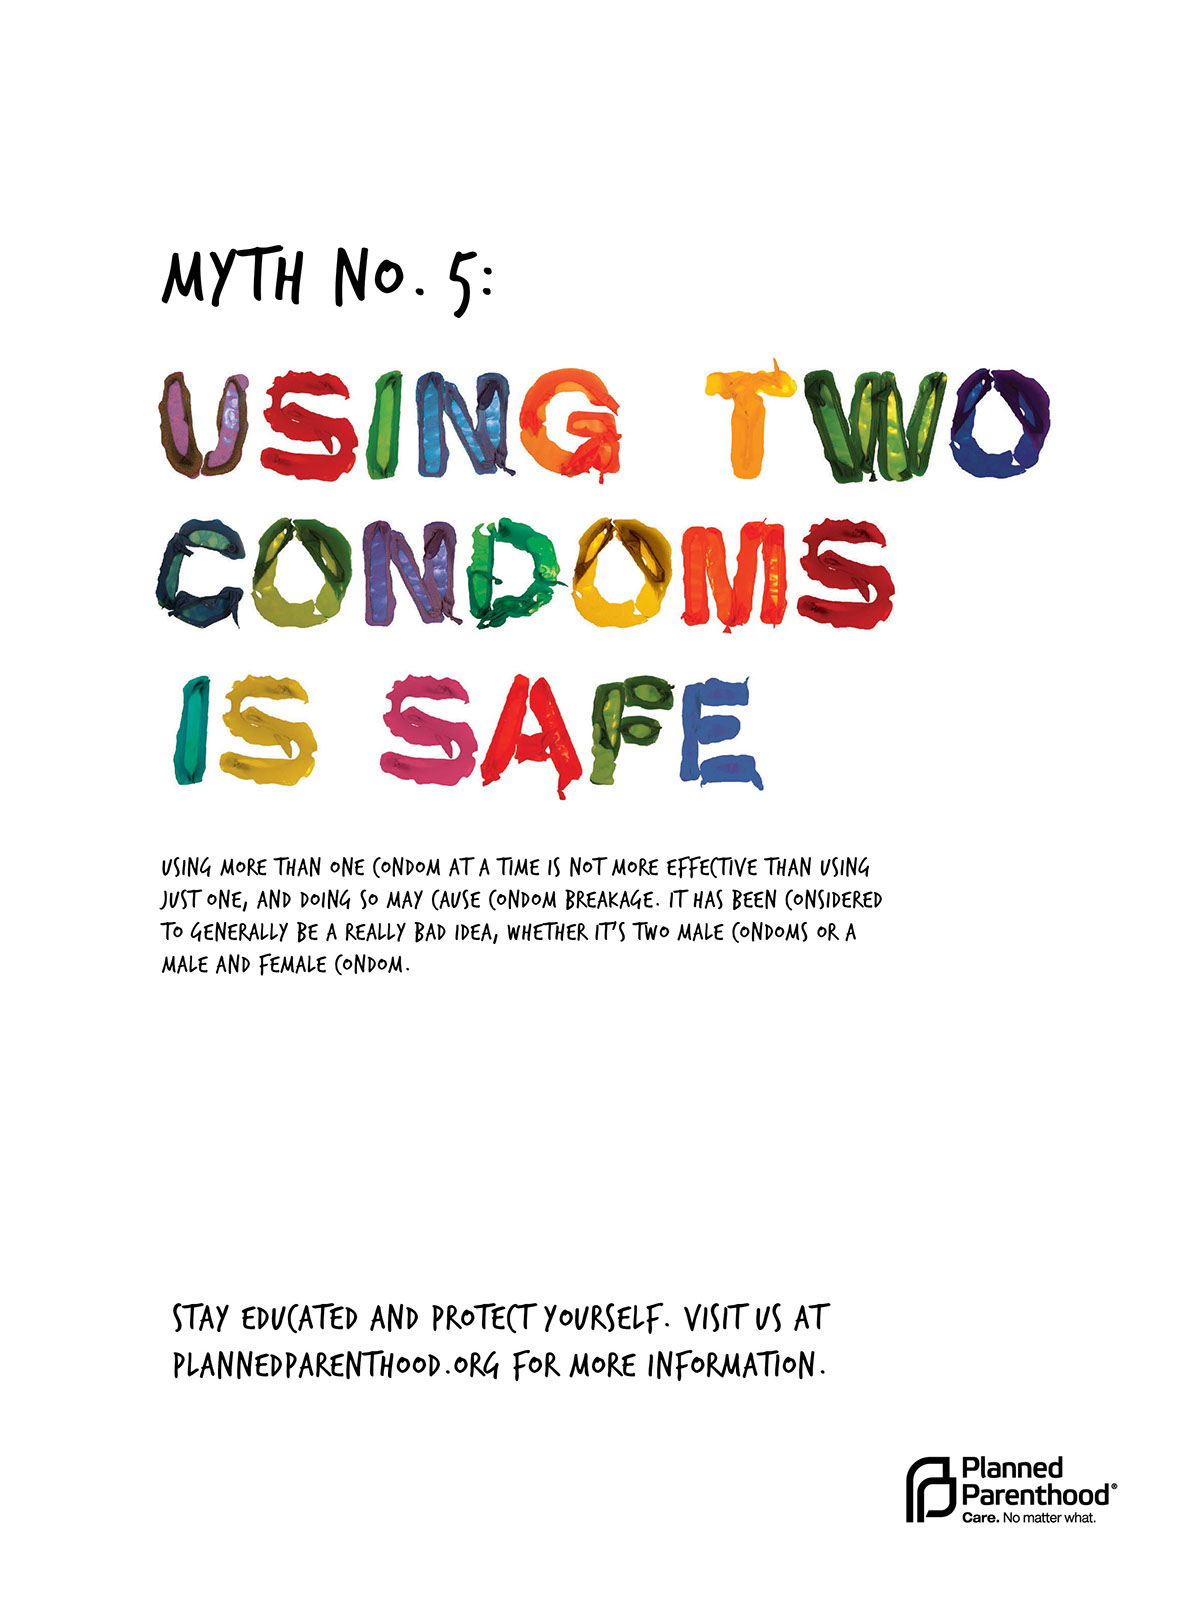 planned parenthood campaign awareness balloon poster CONDOM